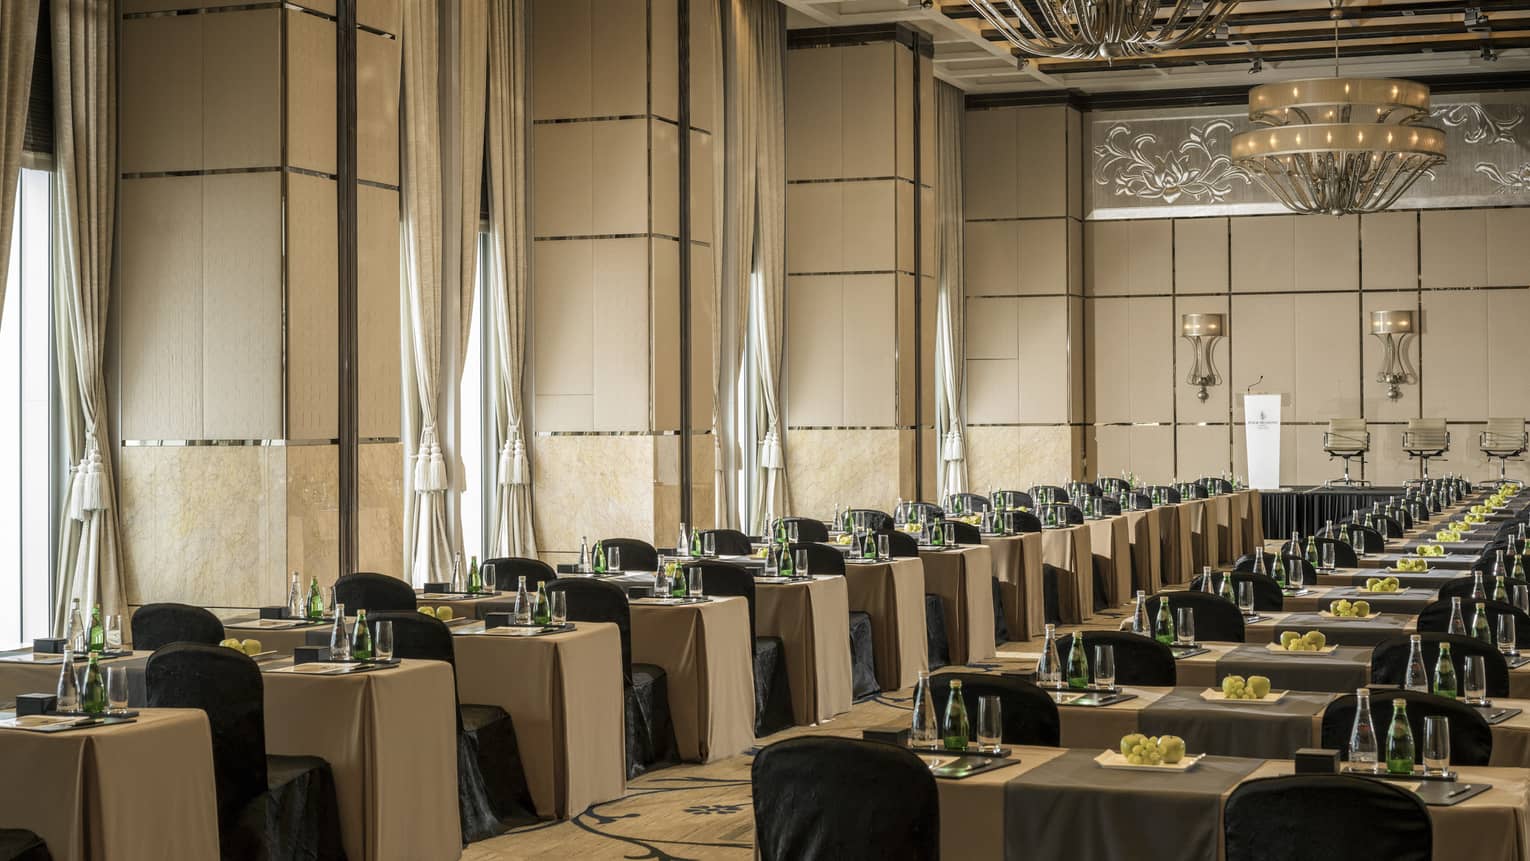 Rows of conference tables and chairs under high ceilings, tall windows in large ballroom